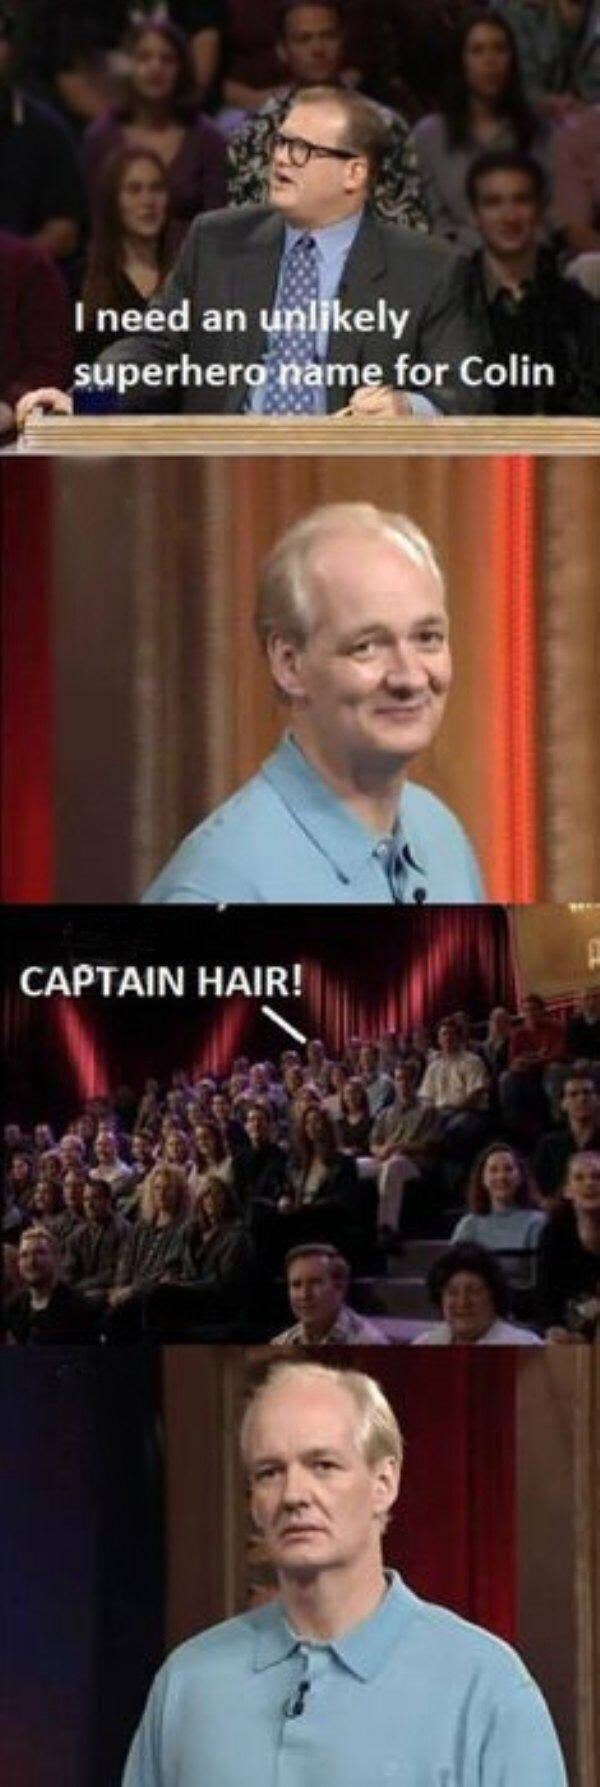 whose line funny - I need an unly superhero name for Colin Captain Hair!